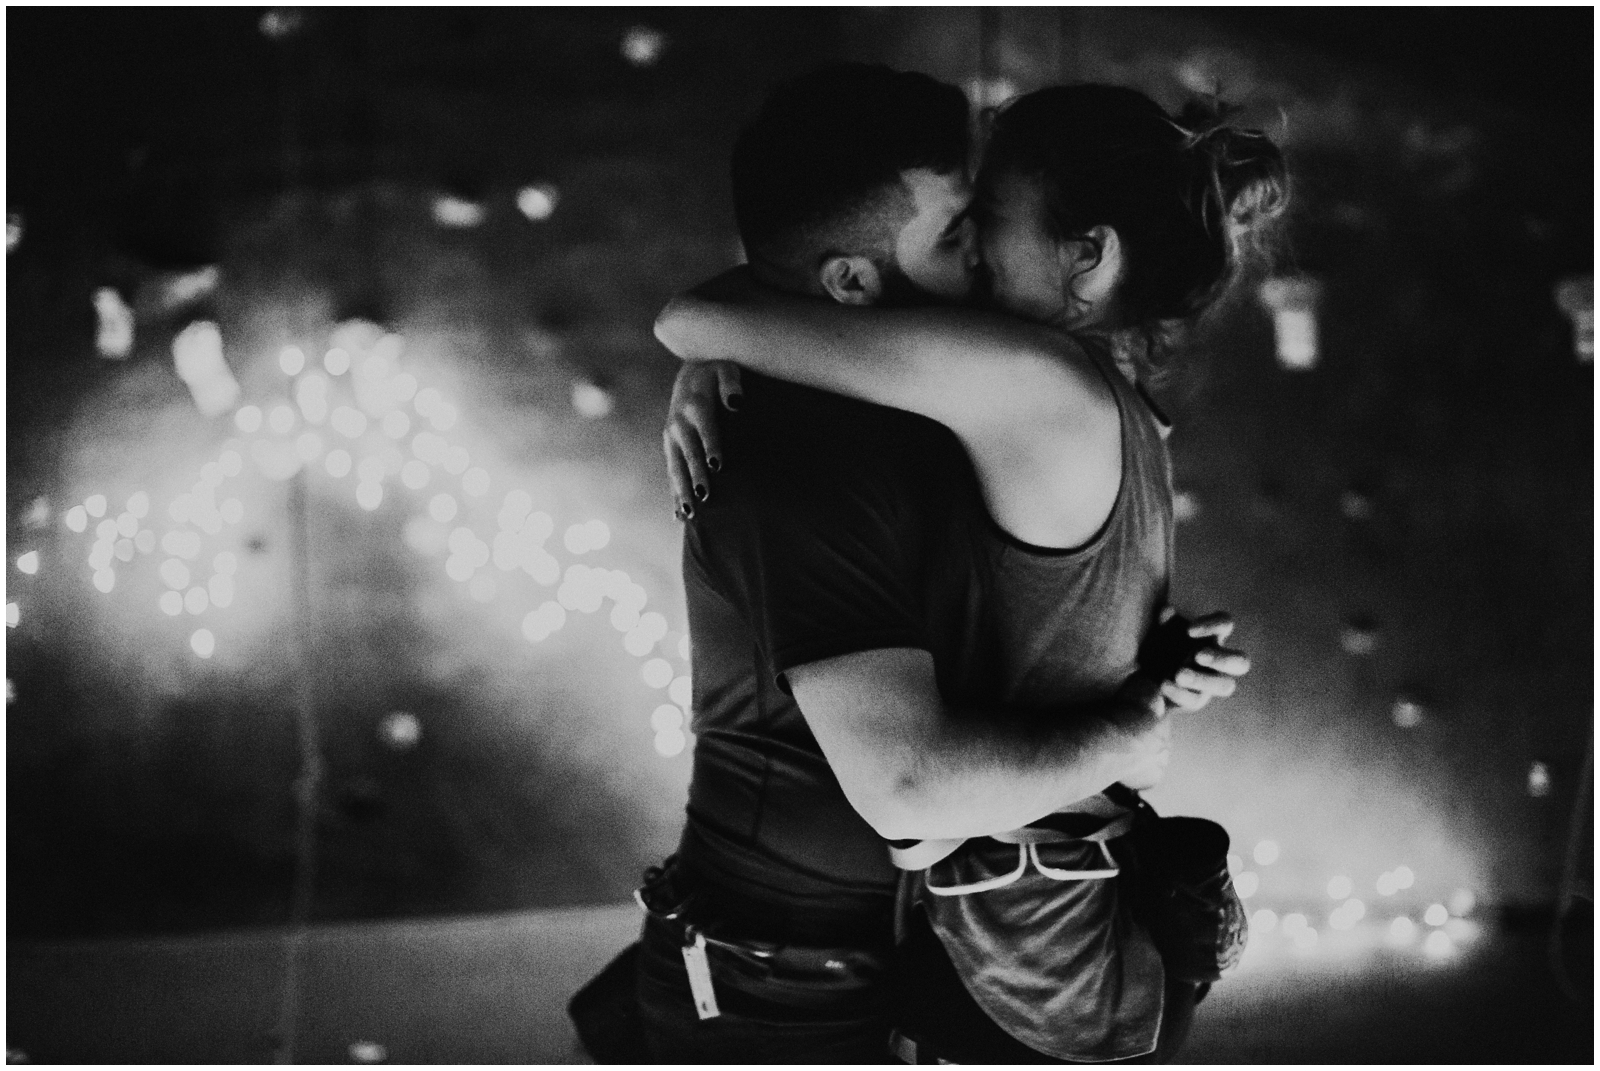 A man and woman hugging in front of lights.